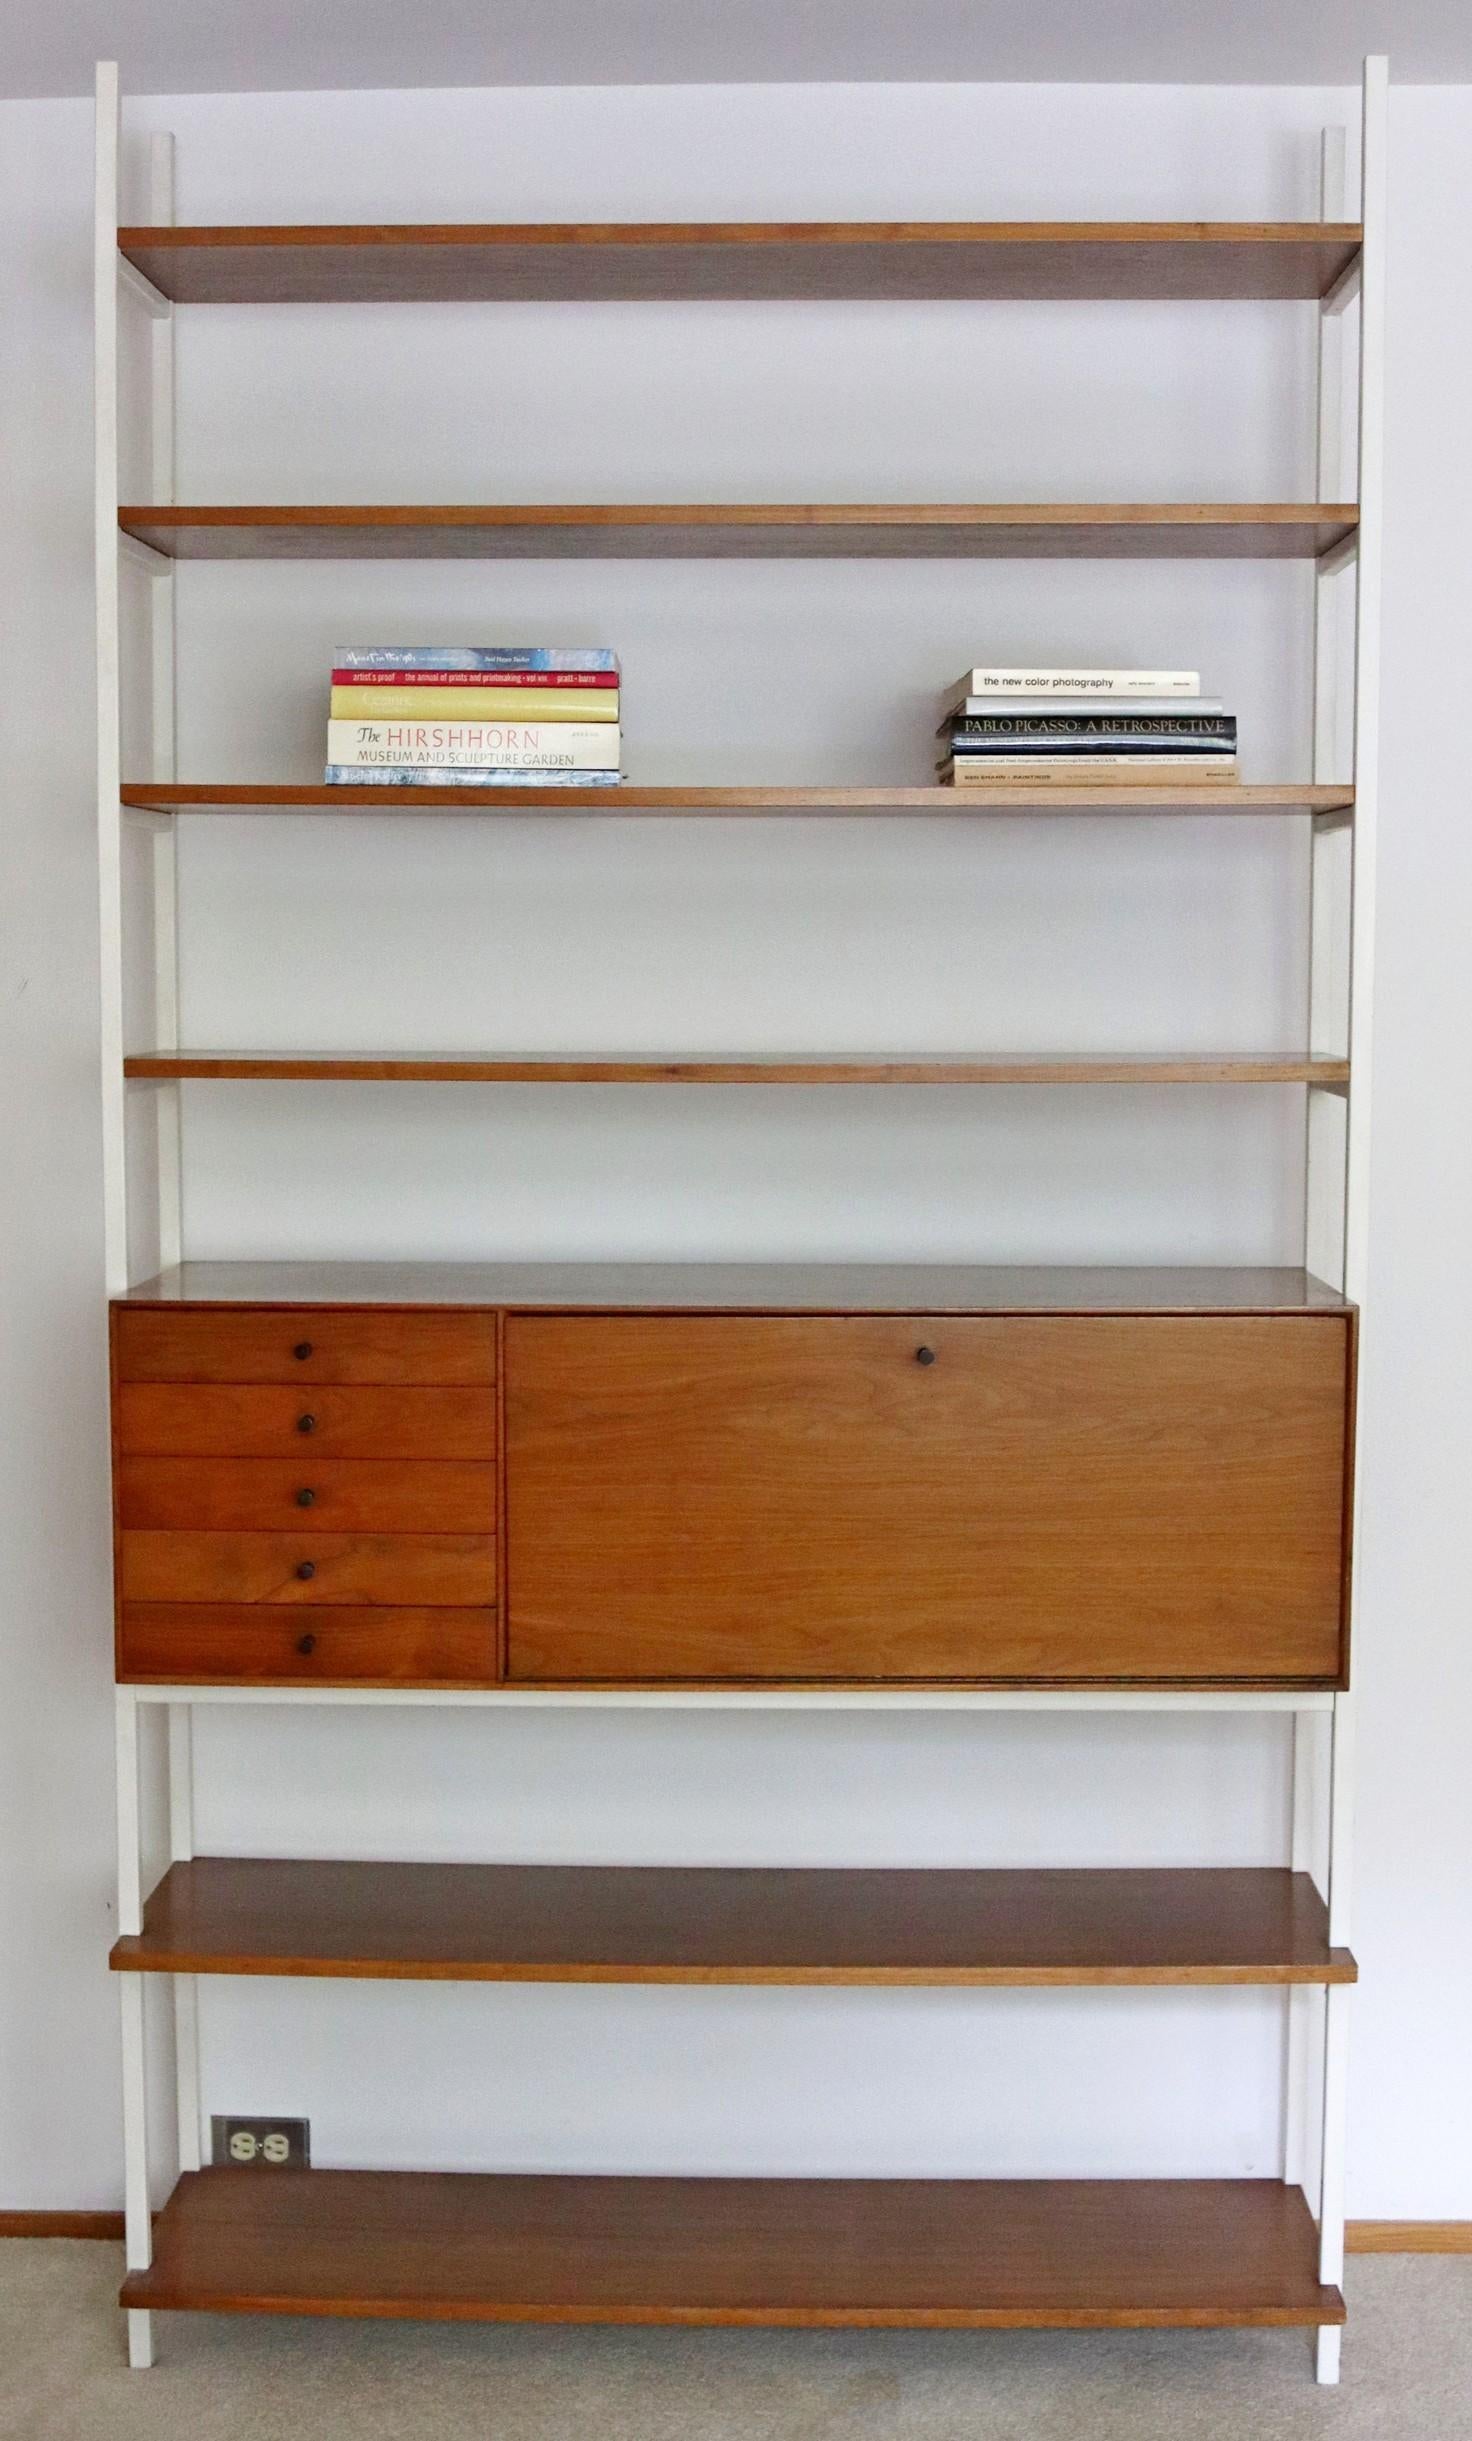 For your consideration is a delightful wall unit, made from walnut and metal shelving, by Milo Baughman for Arch Gordan, circa the 1970s. In excellent vintage condition. Dimensions: 50